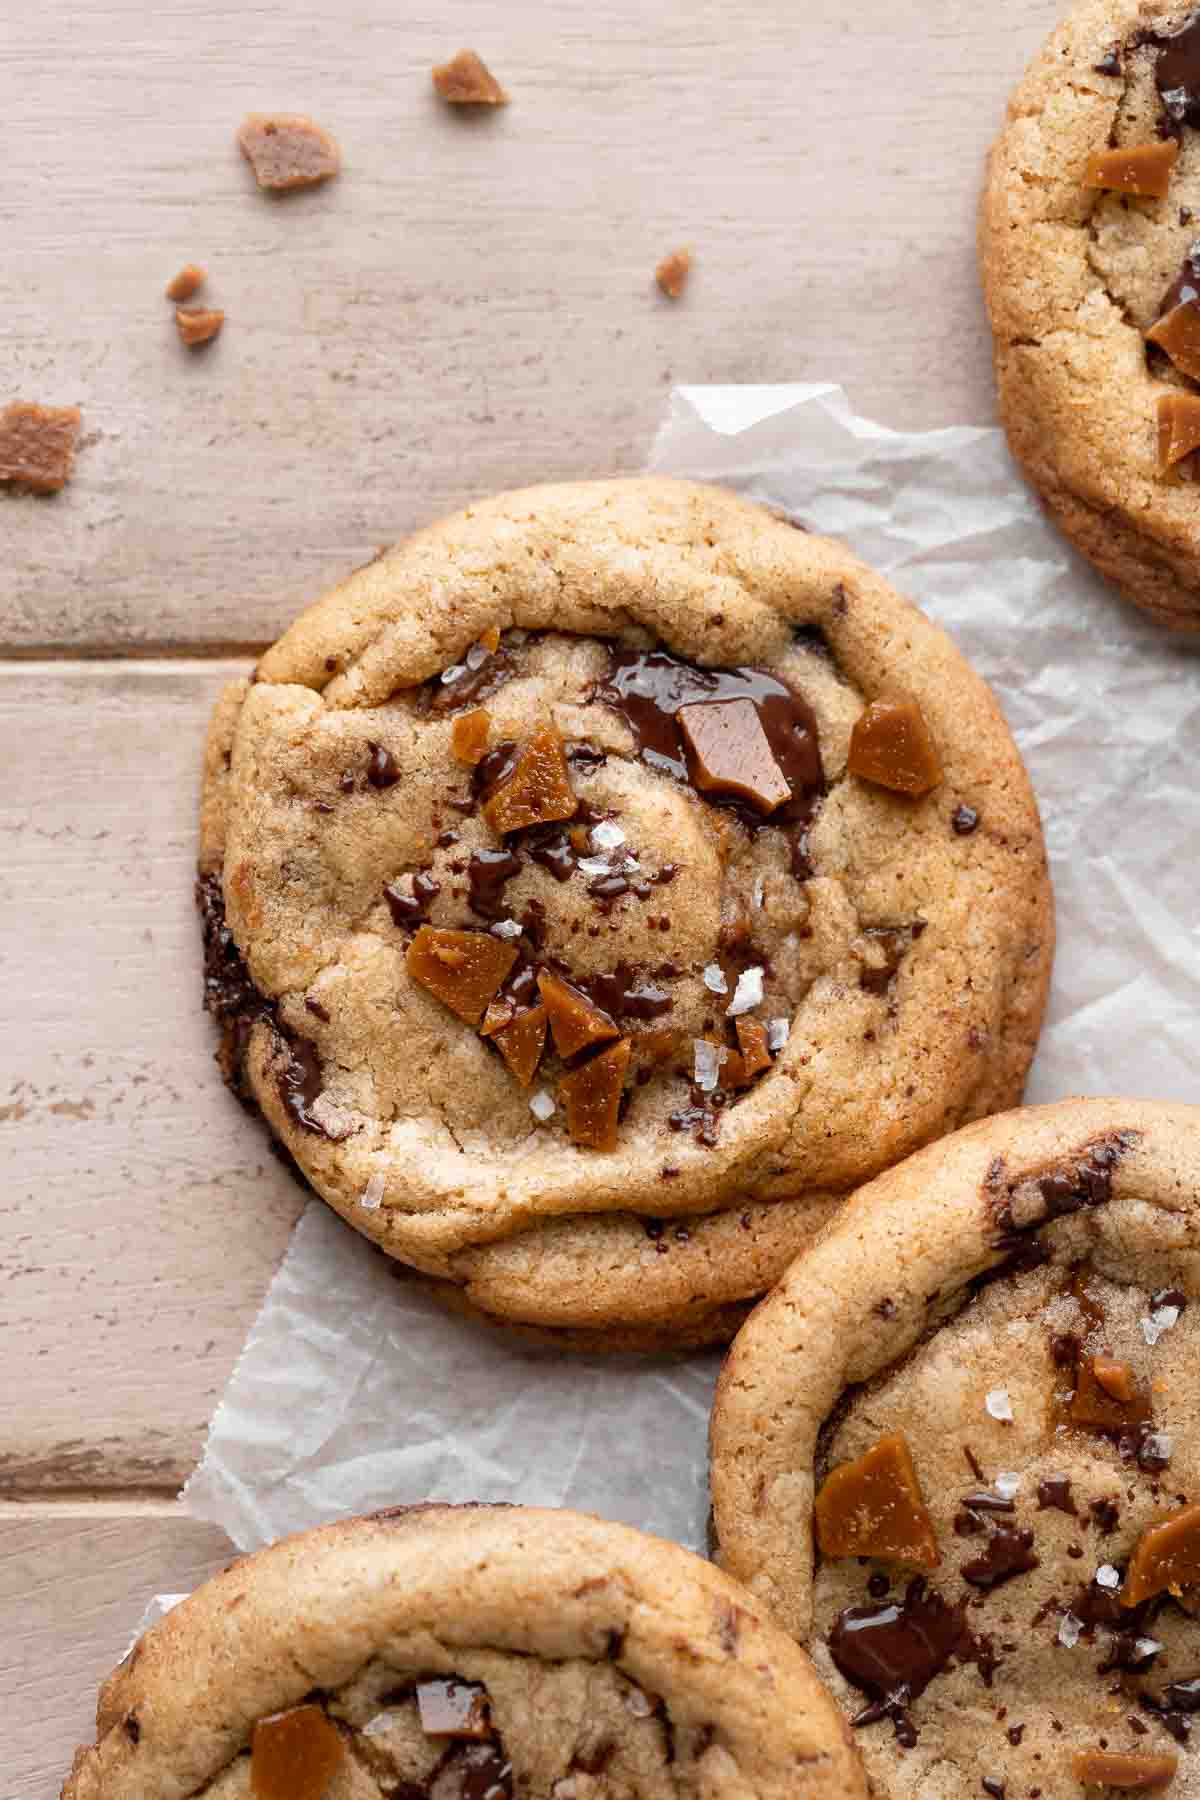 chocolate chip toffee cookie after baking topped with extra toffee pieces.